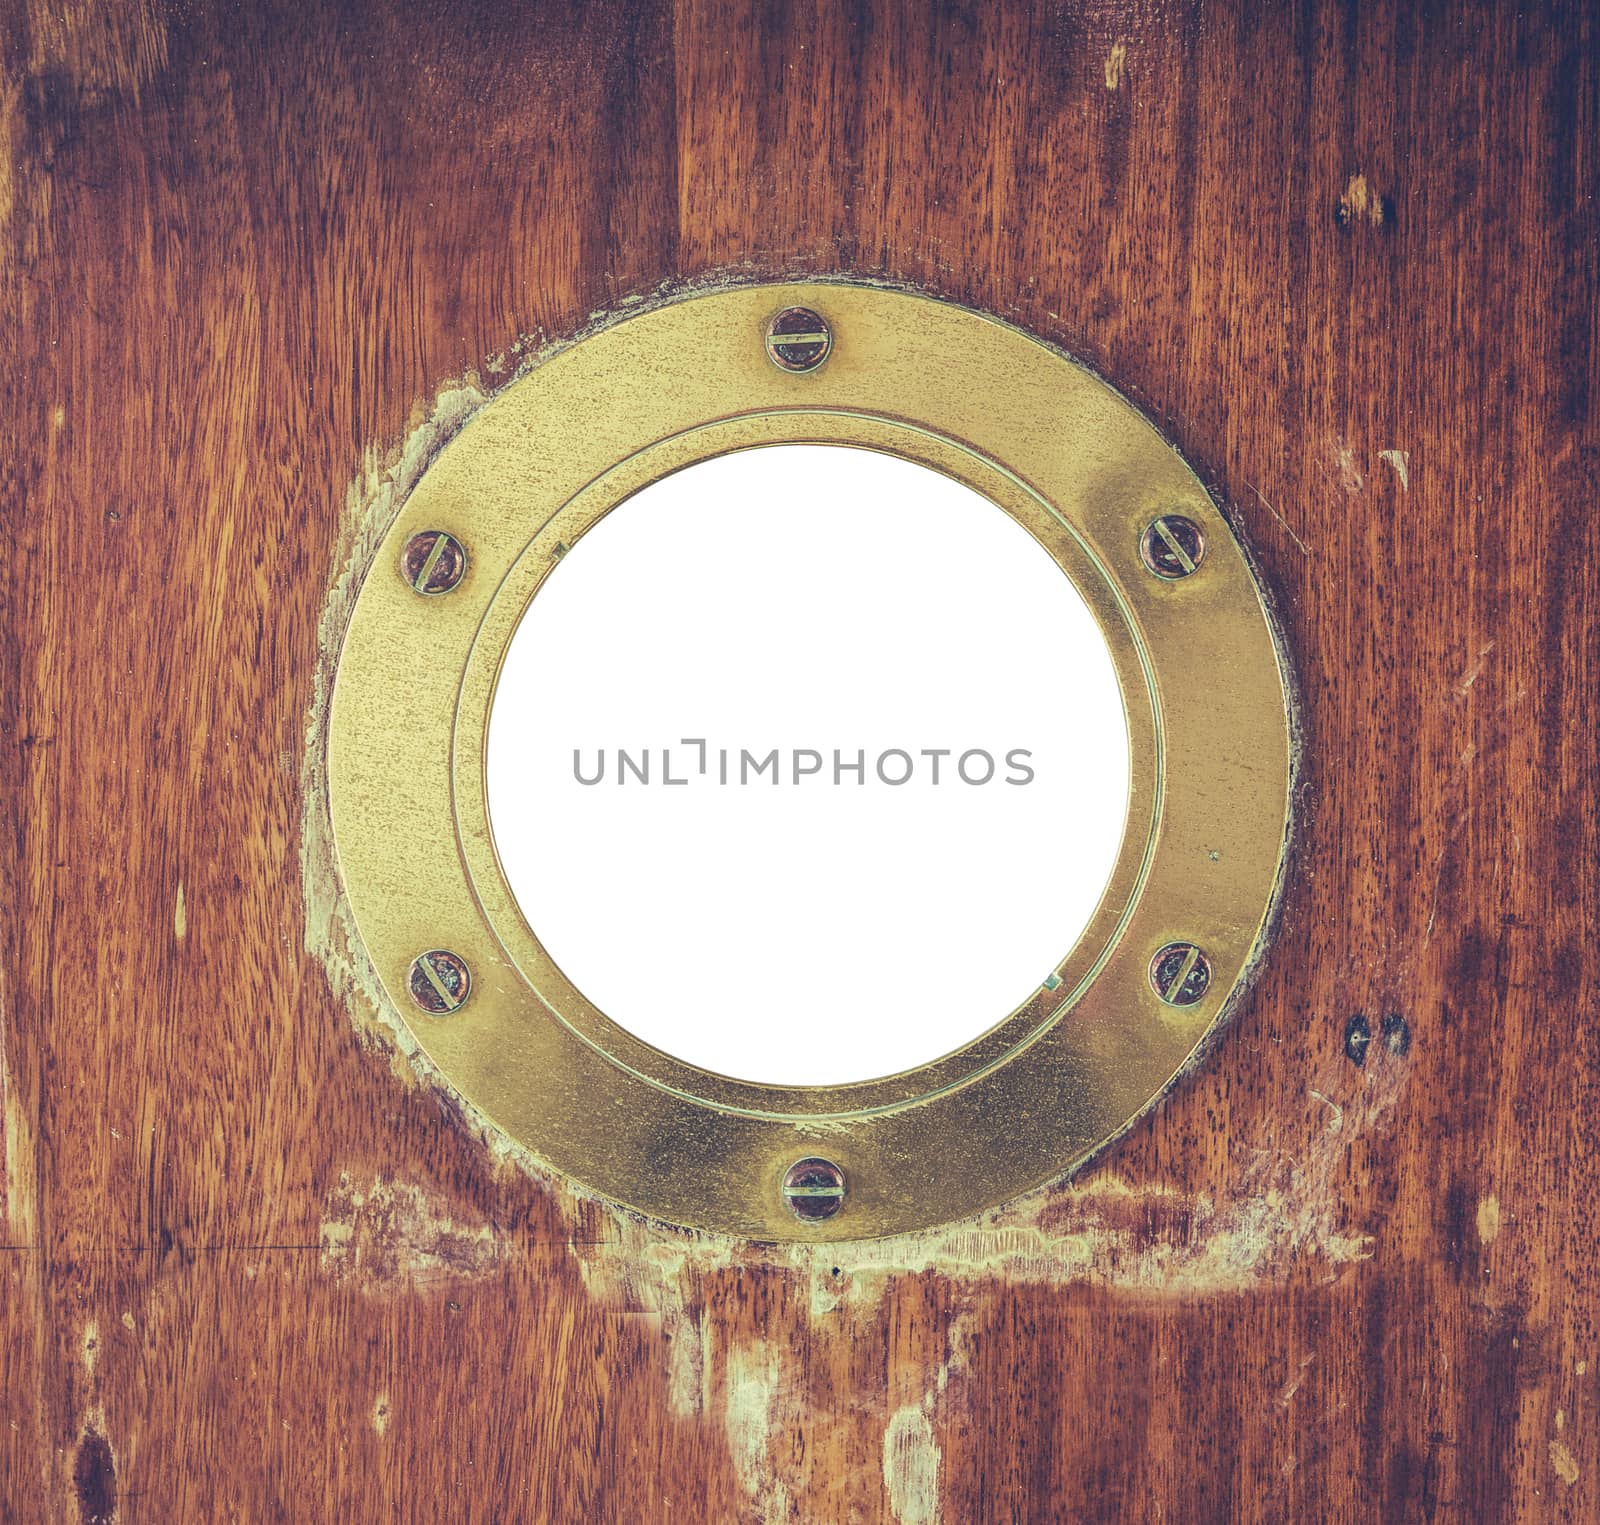 A Vintage Brass Or Bronze Porthole In A Ship's Door With Isolated Center